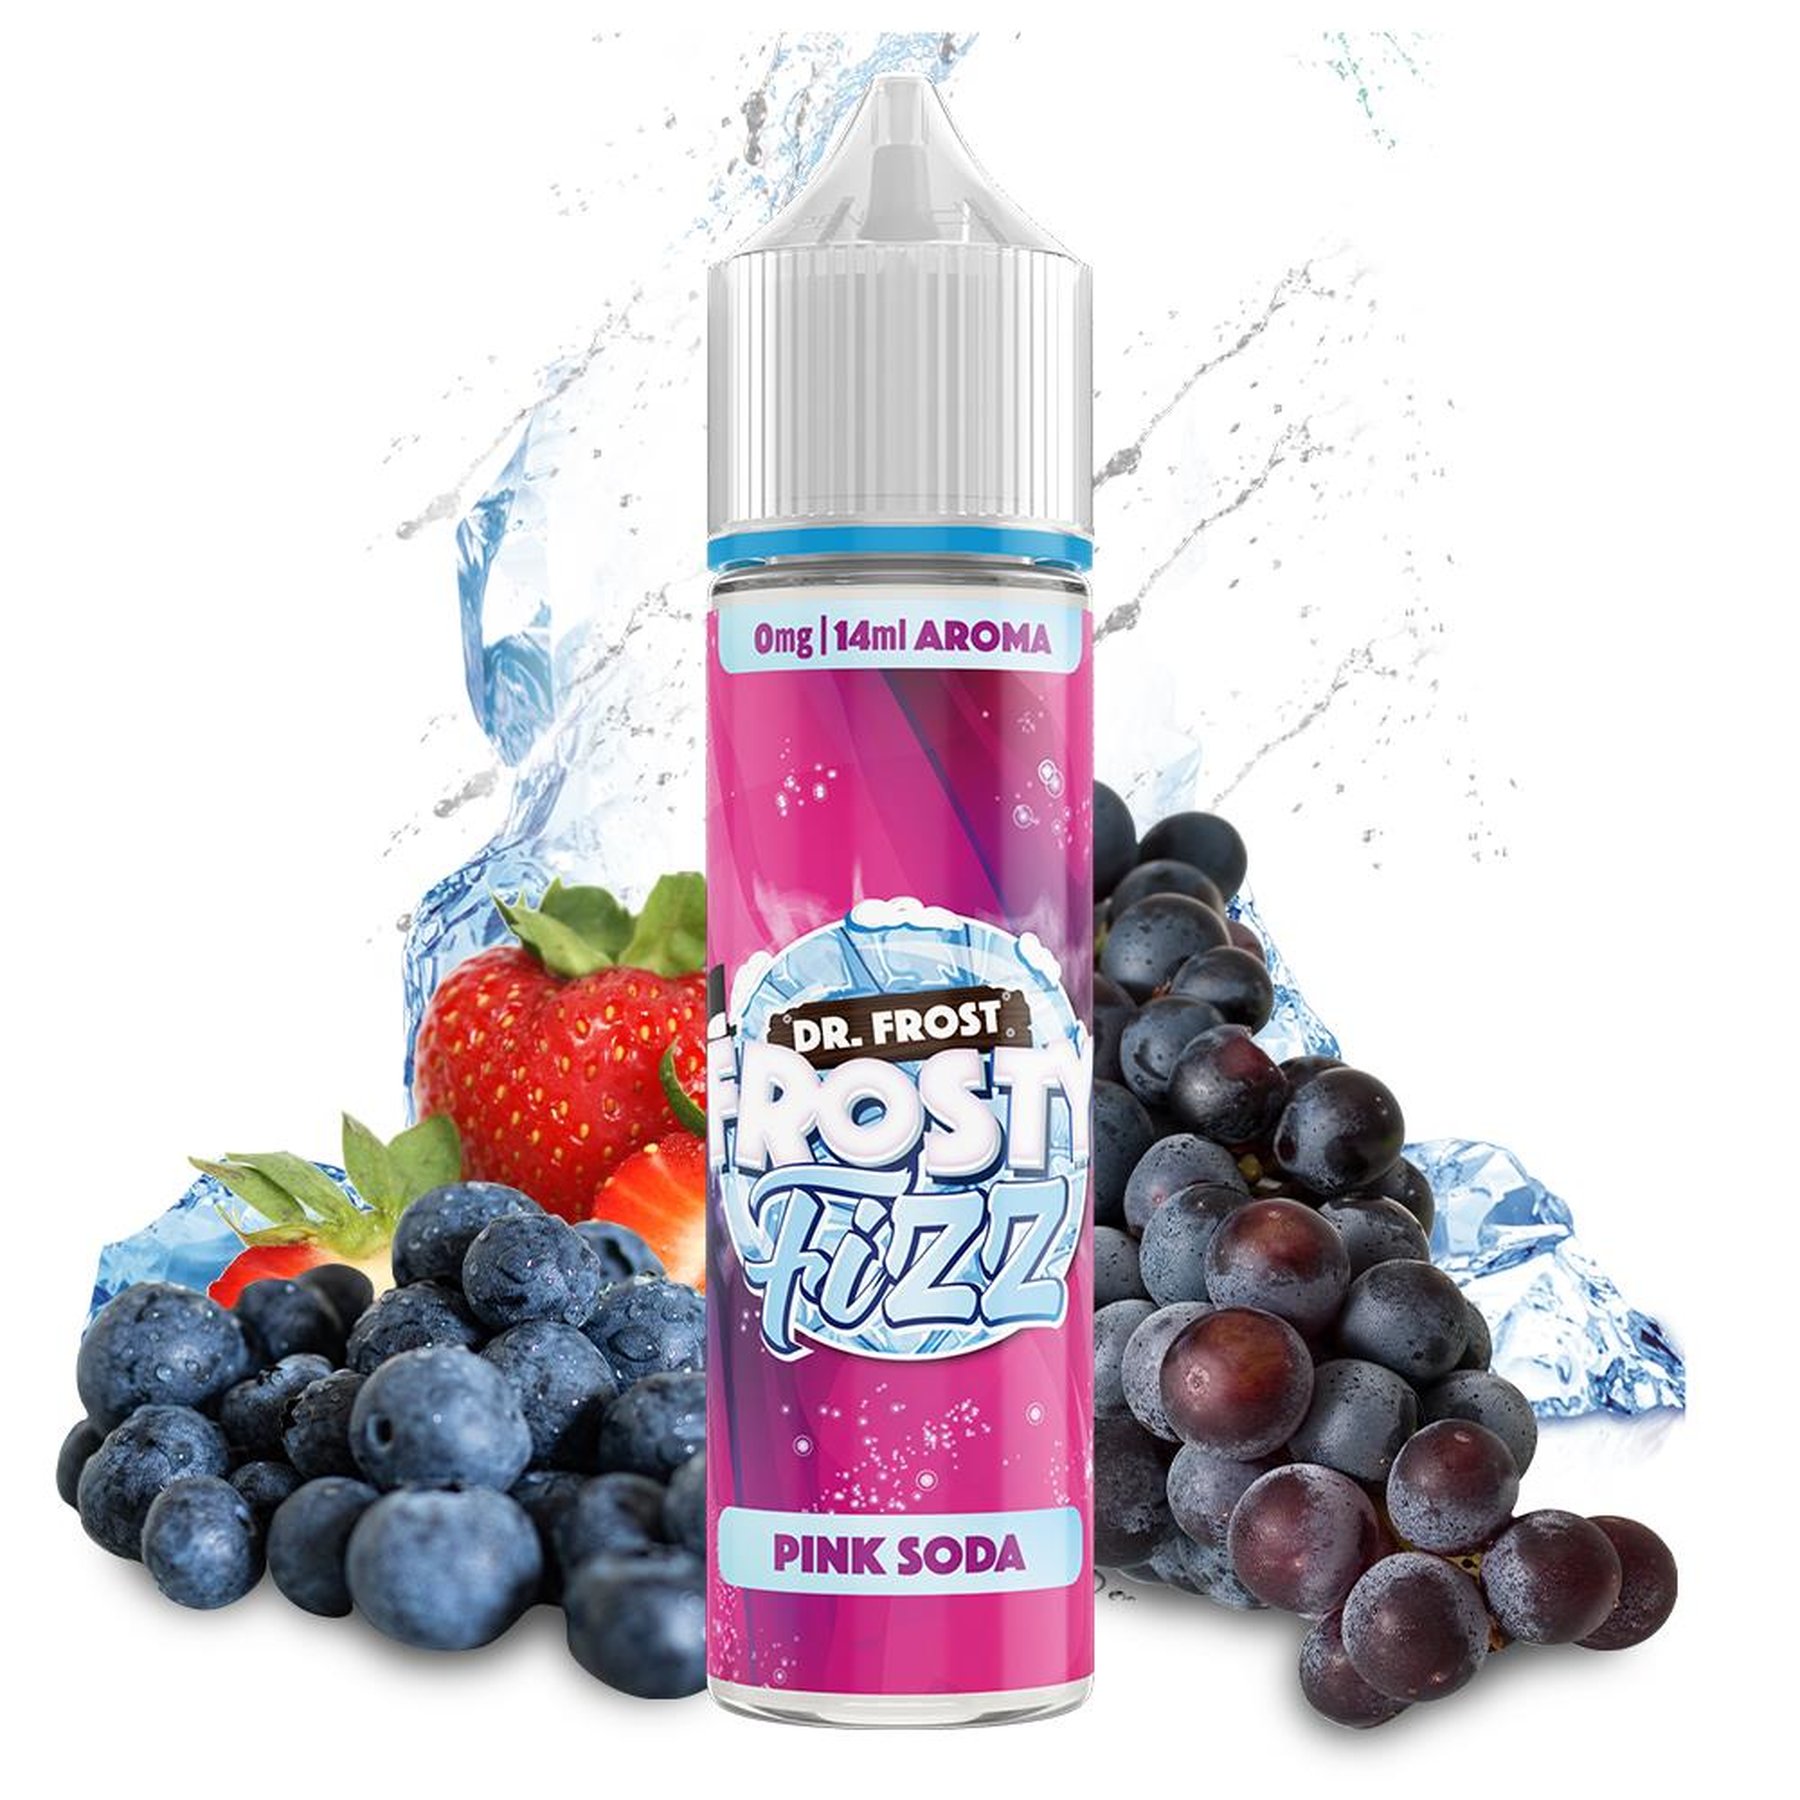 Dr. Frost Pink Soda Ice Longfill 14ml